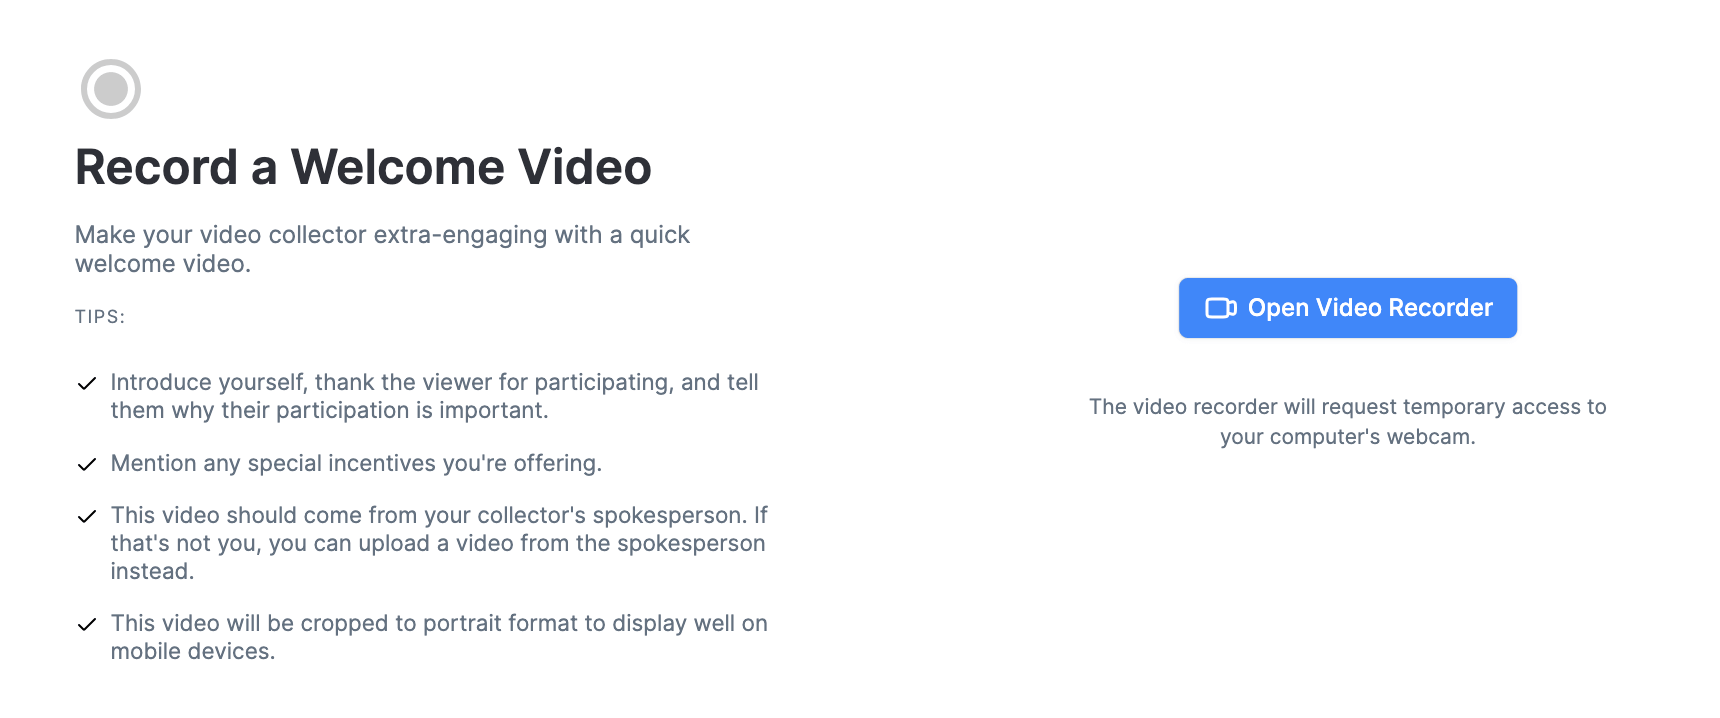 Record a welcome video. 